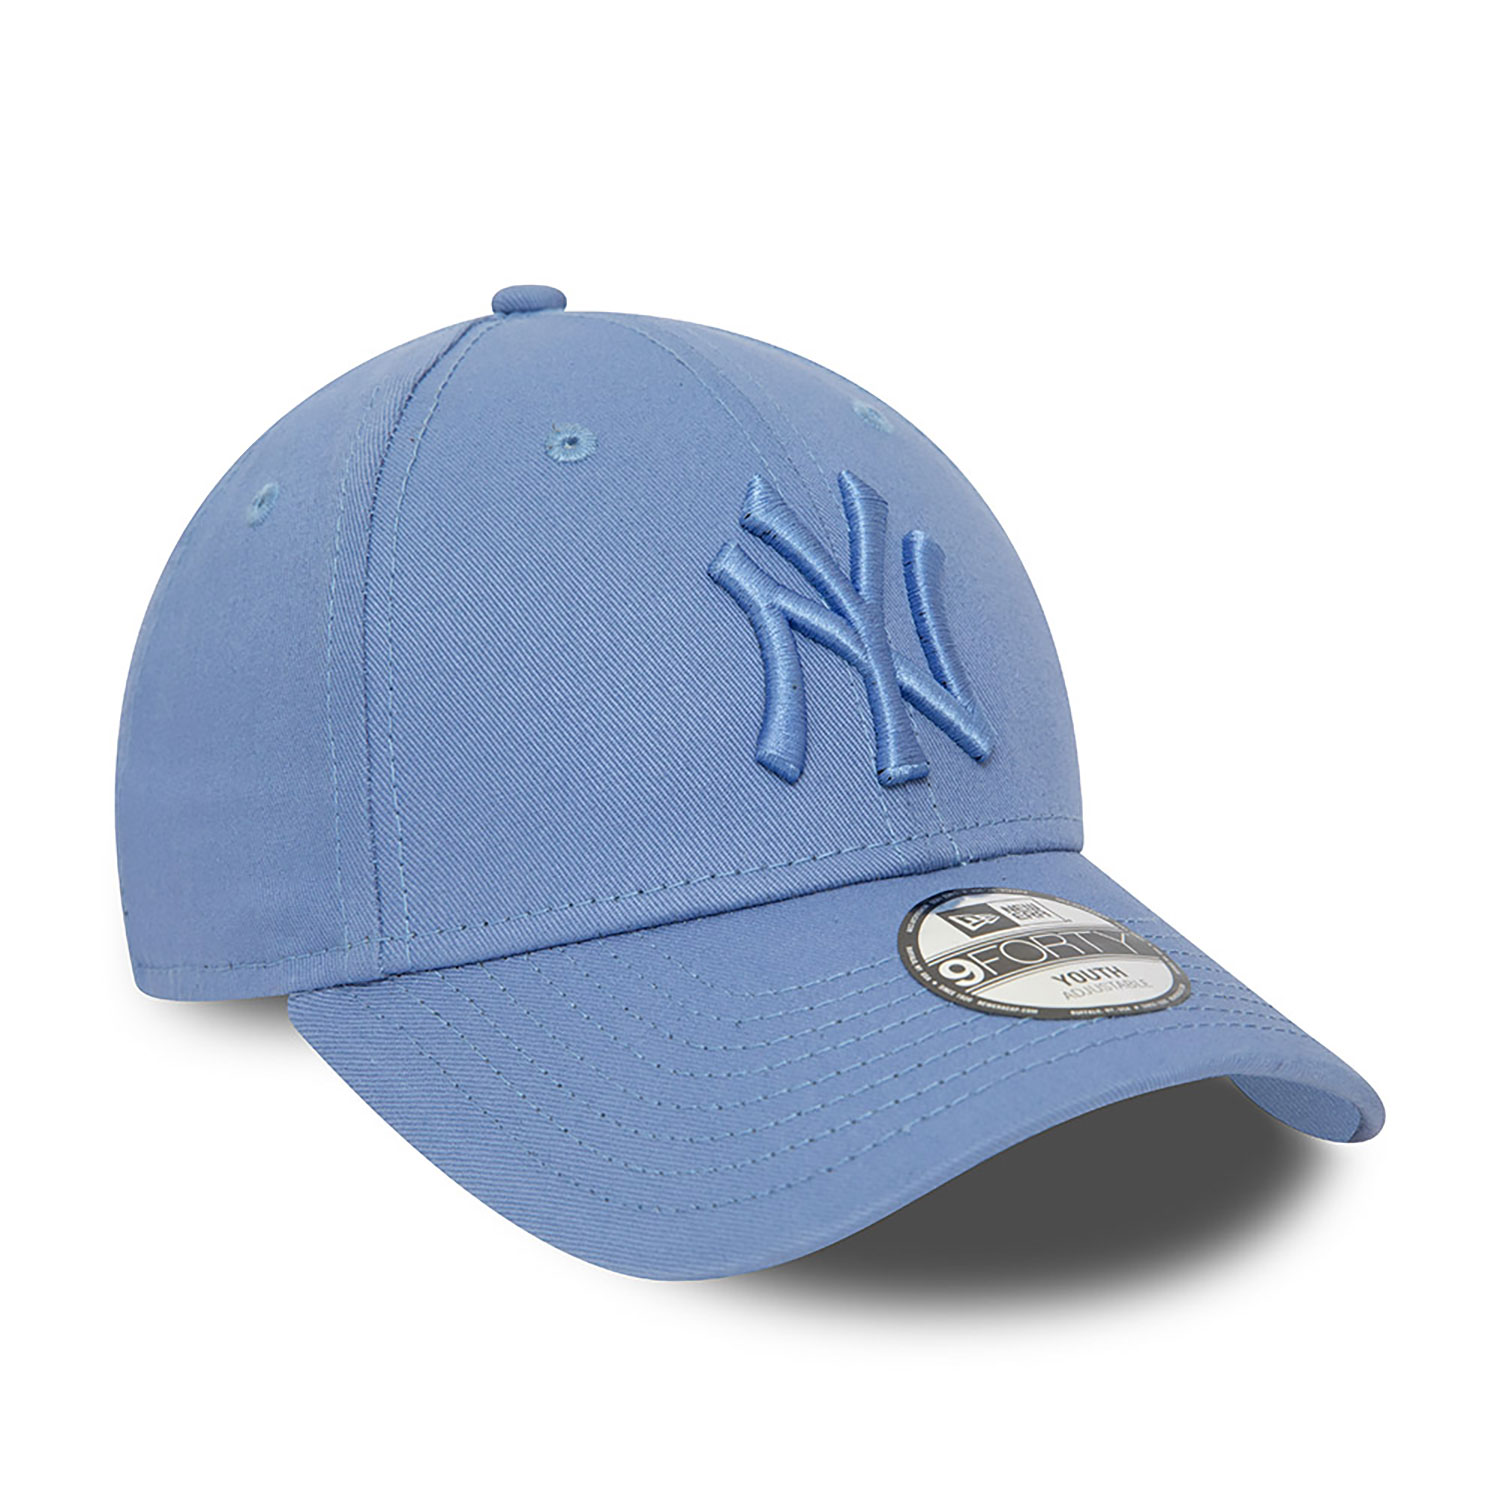 New York Yankees Youth League Essential Blue 9FORTY Adjustable Cap